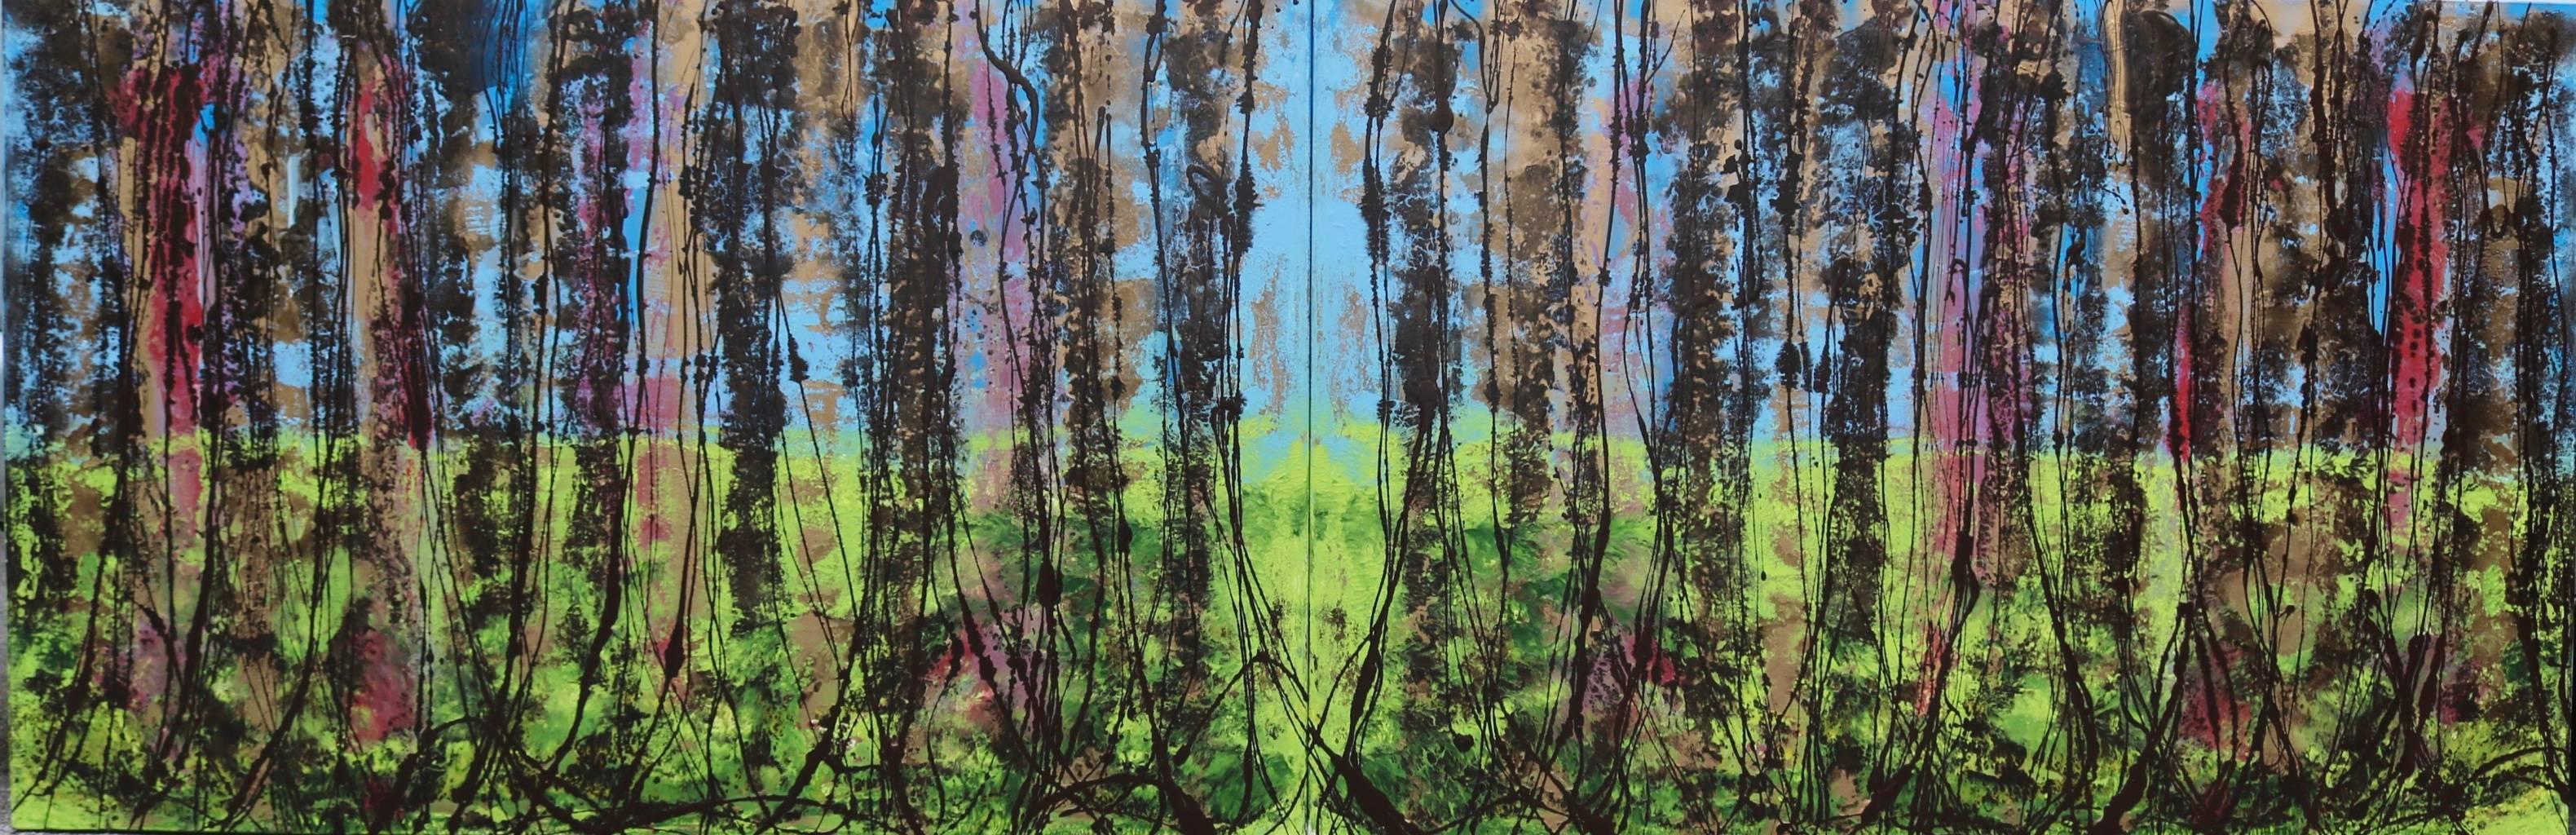 Translated title: "Forest"

Acrylic on double canvas.
This is a diptych.